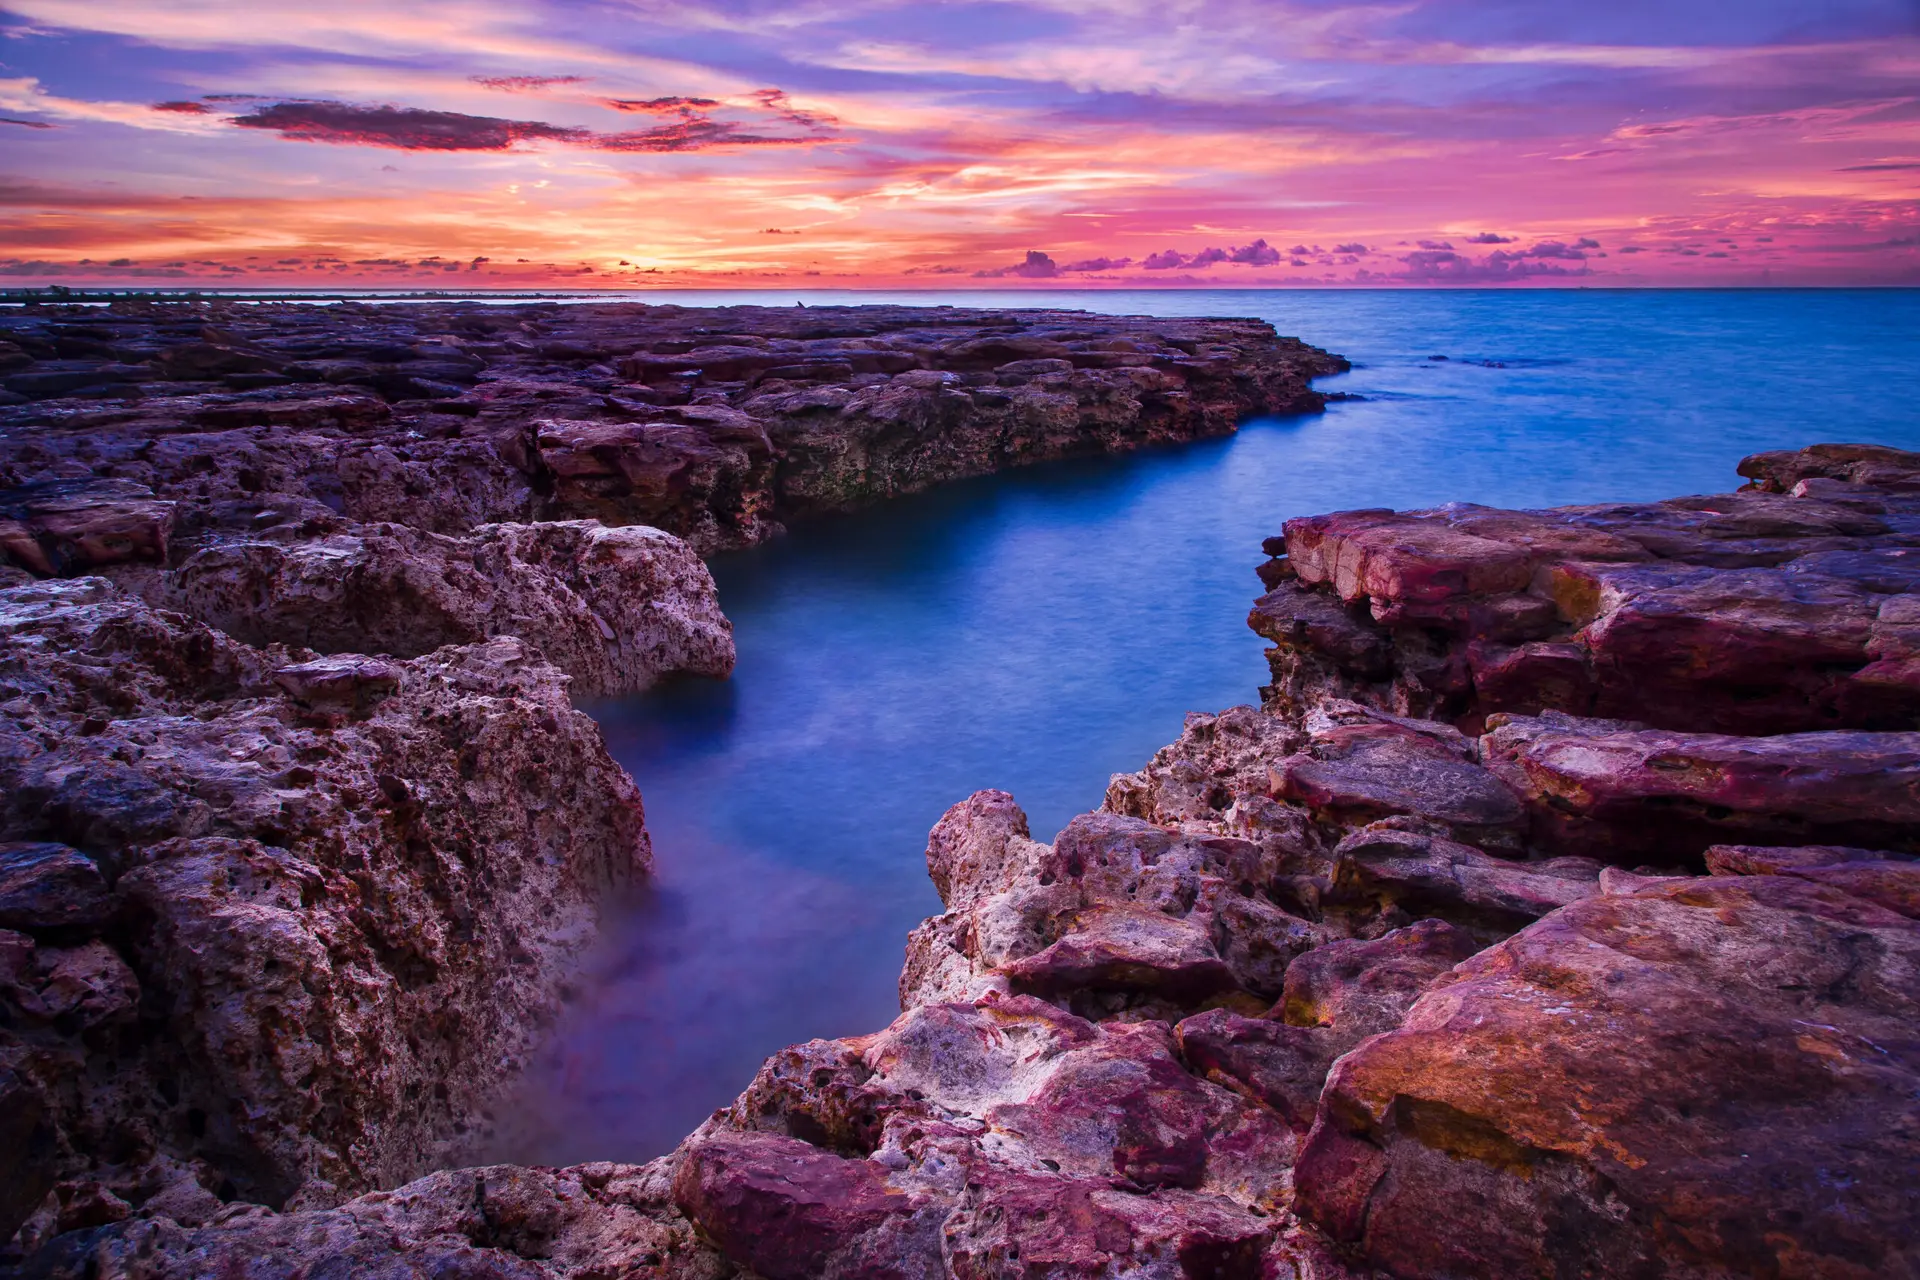 A breathtaking sunset over the rocky coastline of Nightcliff in Darwin, Australia, showcasing the vibrant colors and serene beauty of the ocean.